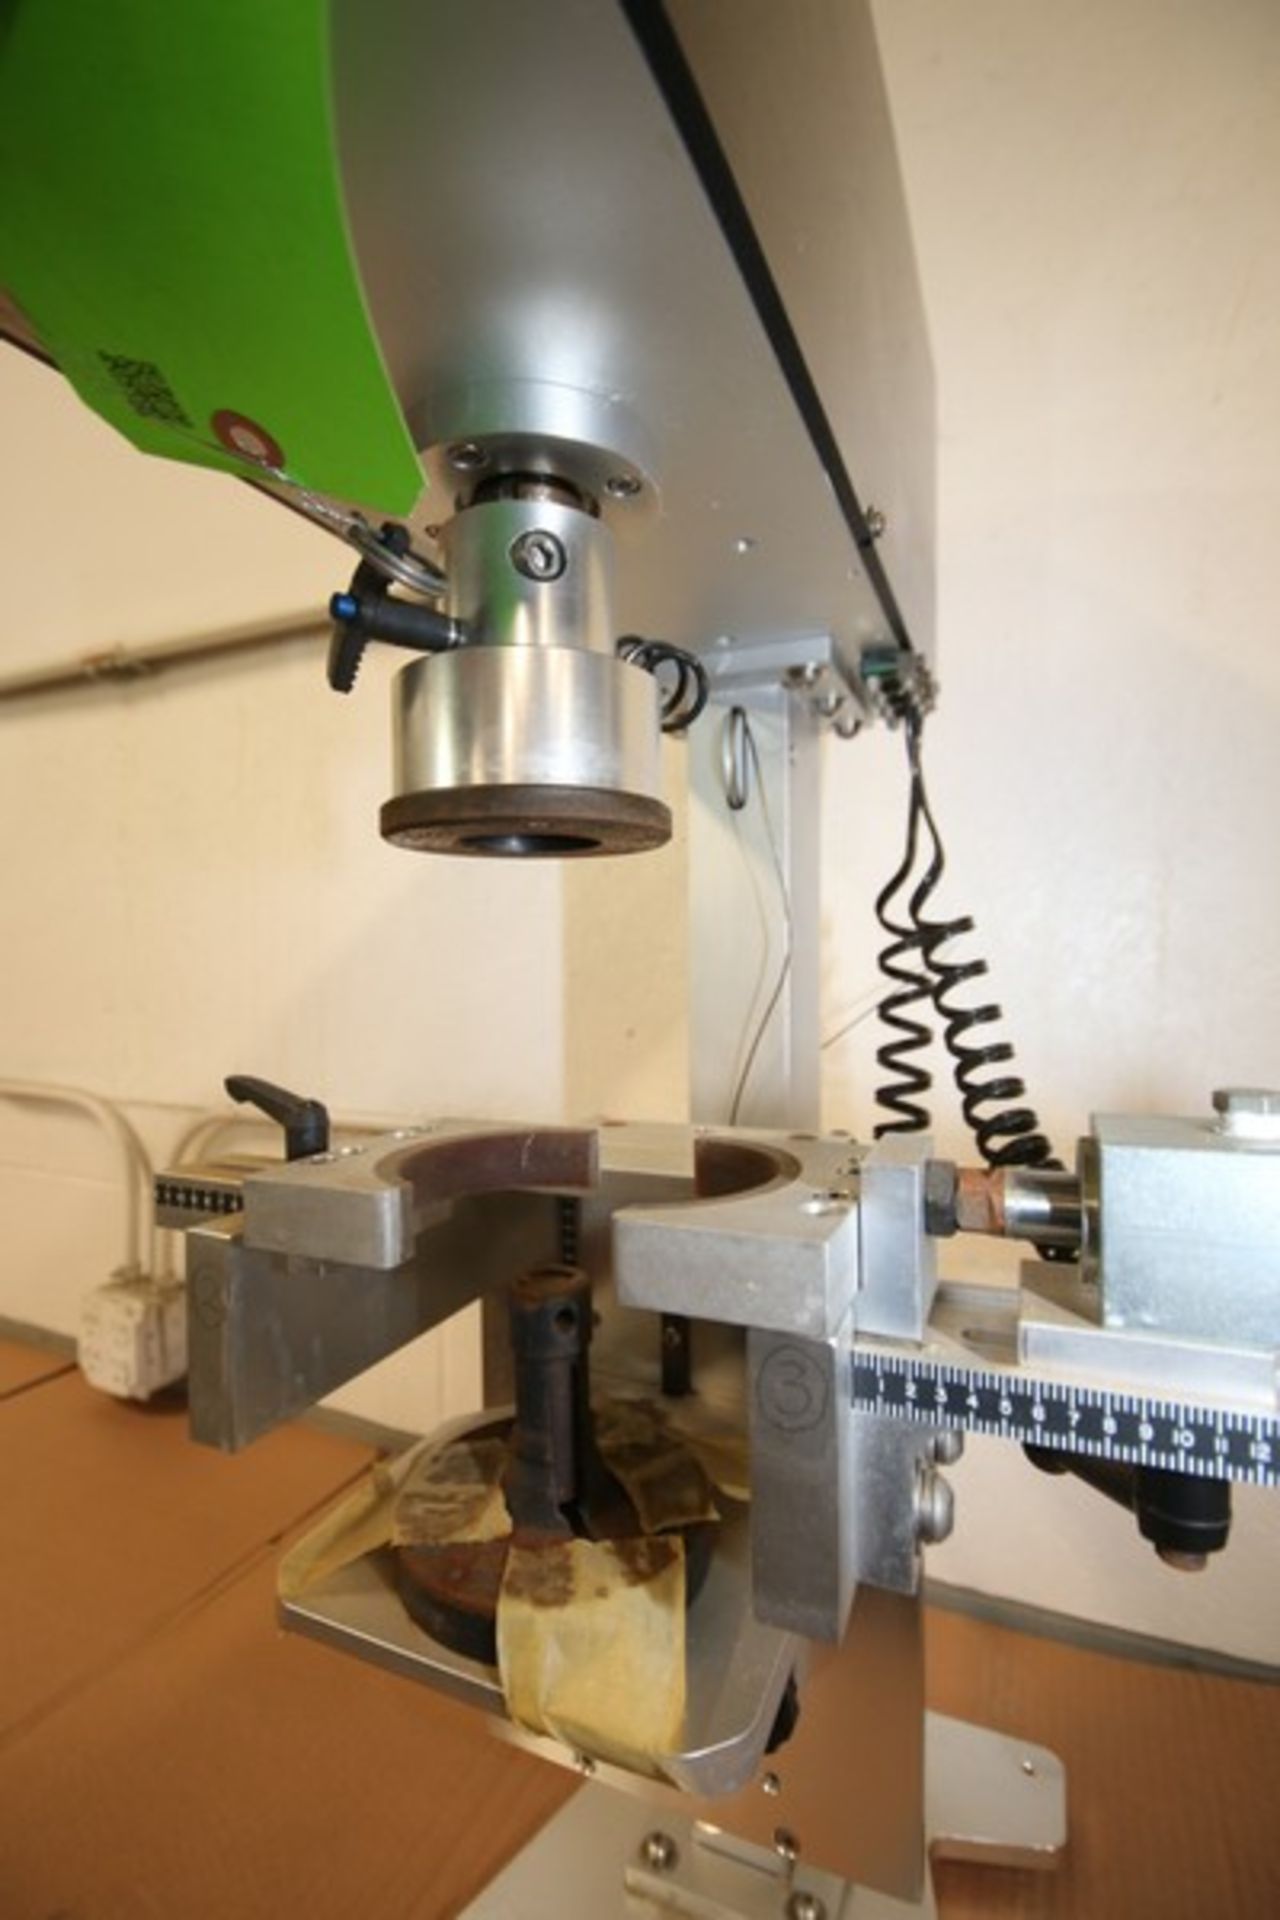 Sure Torque Inc. Torque Tester, Model ST100, SN 5454, 110V (INV#66952) (Located @ the MDG Auction - Image 3 of 6